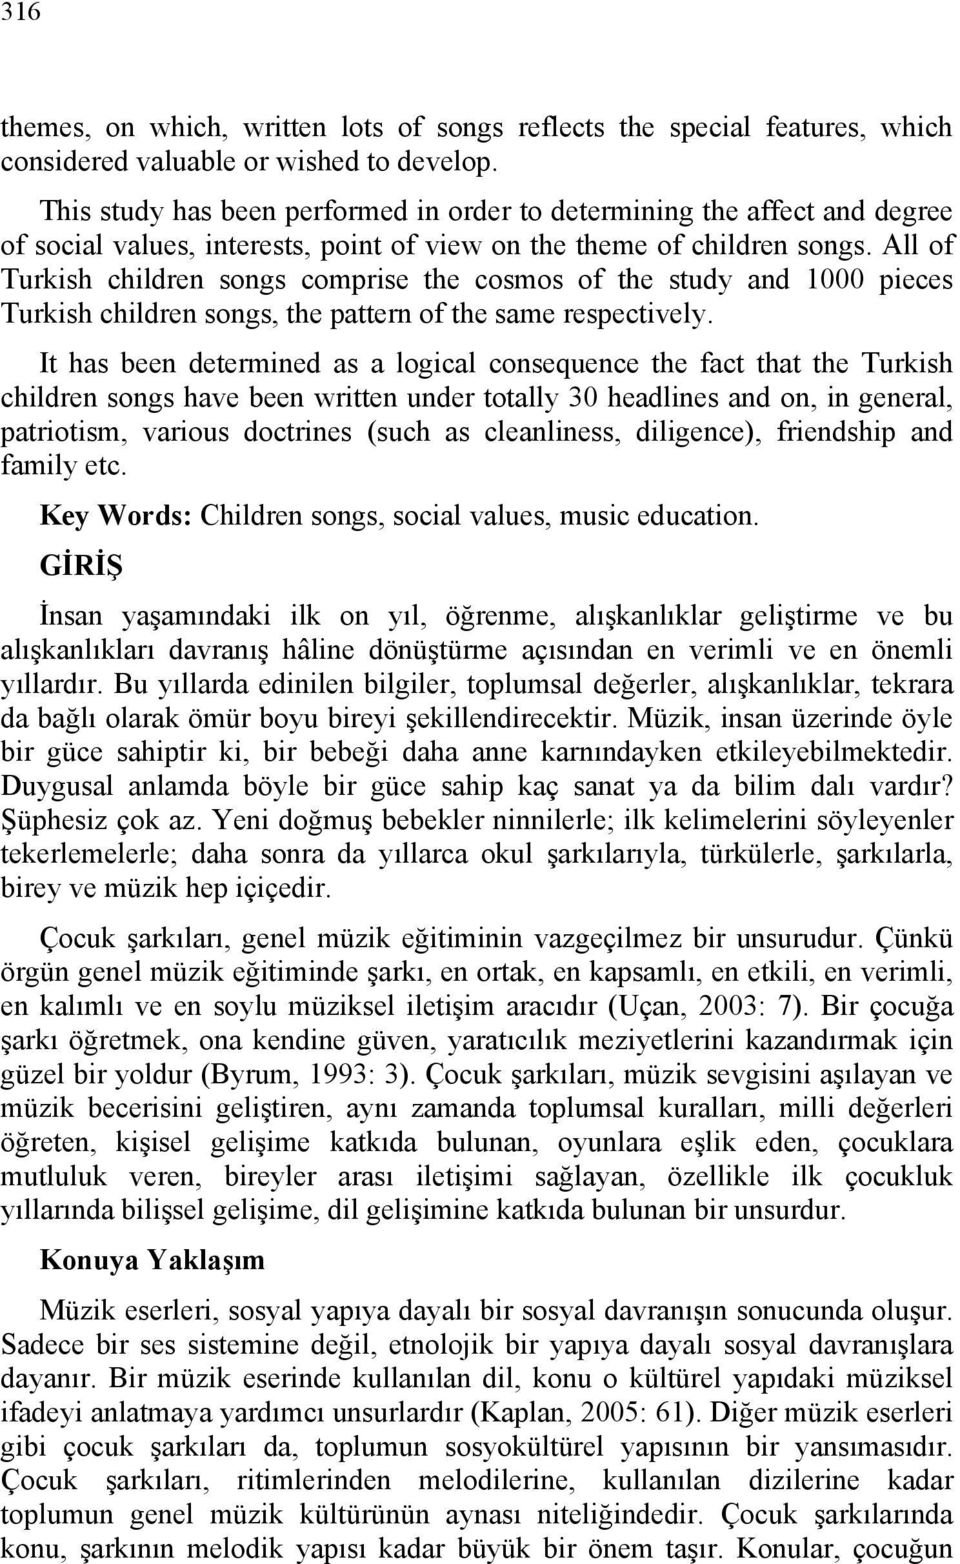 All of Turkish children songs comprise the cosmos of the study and 1000 pieces Turkish children songs, the pattern of the same respectively.